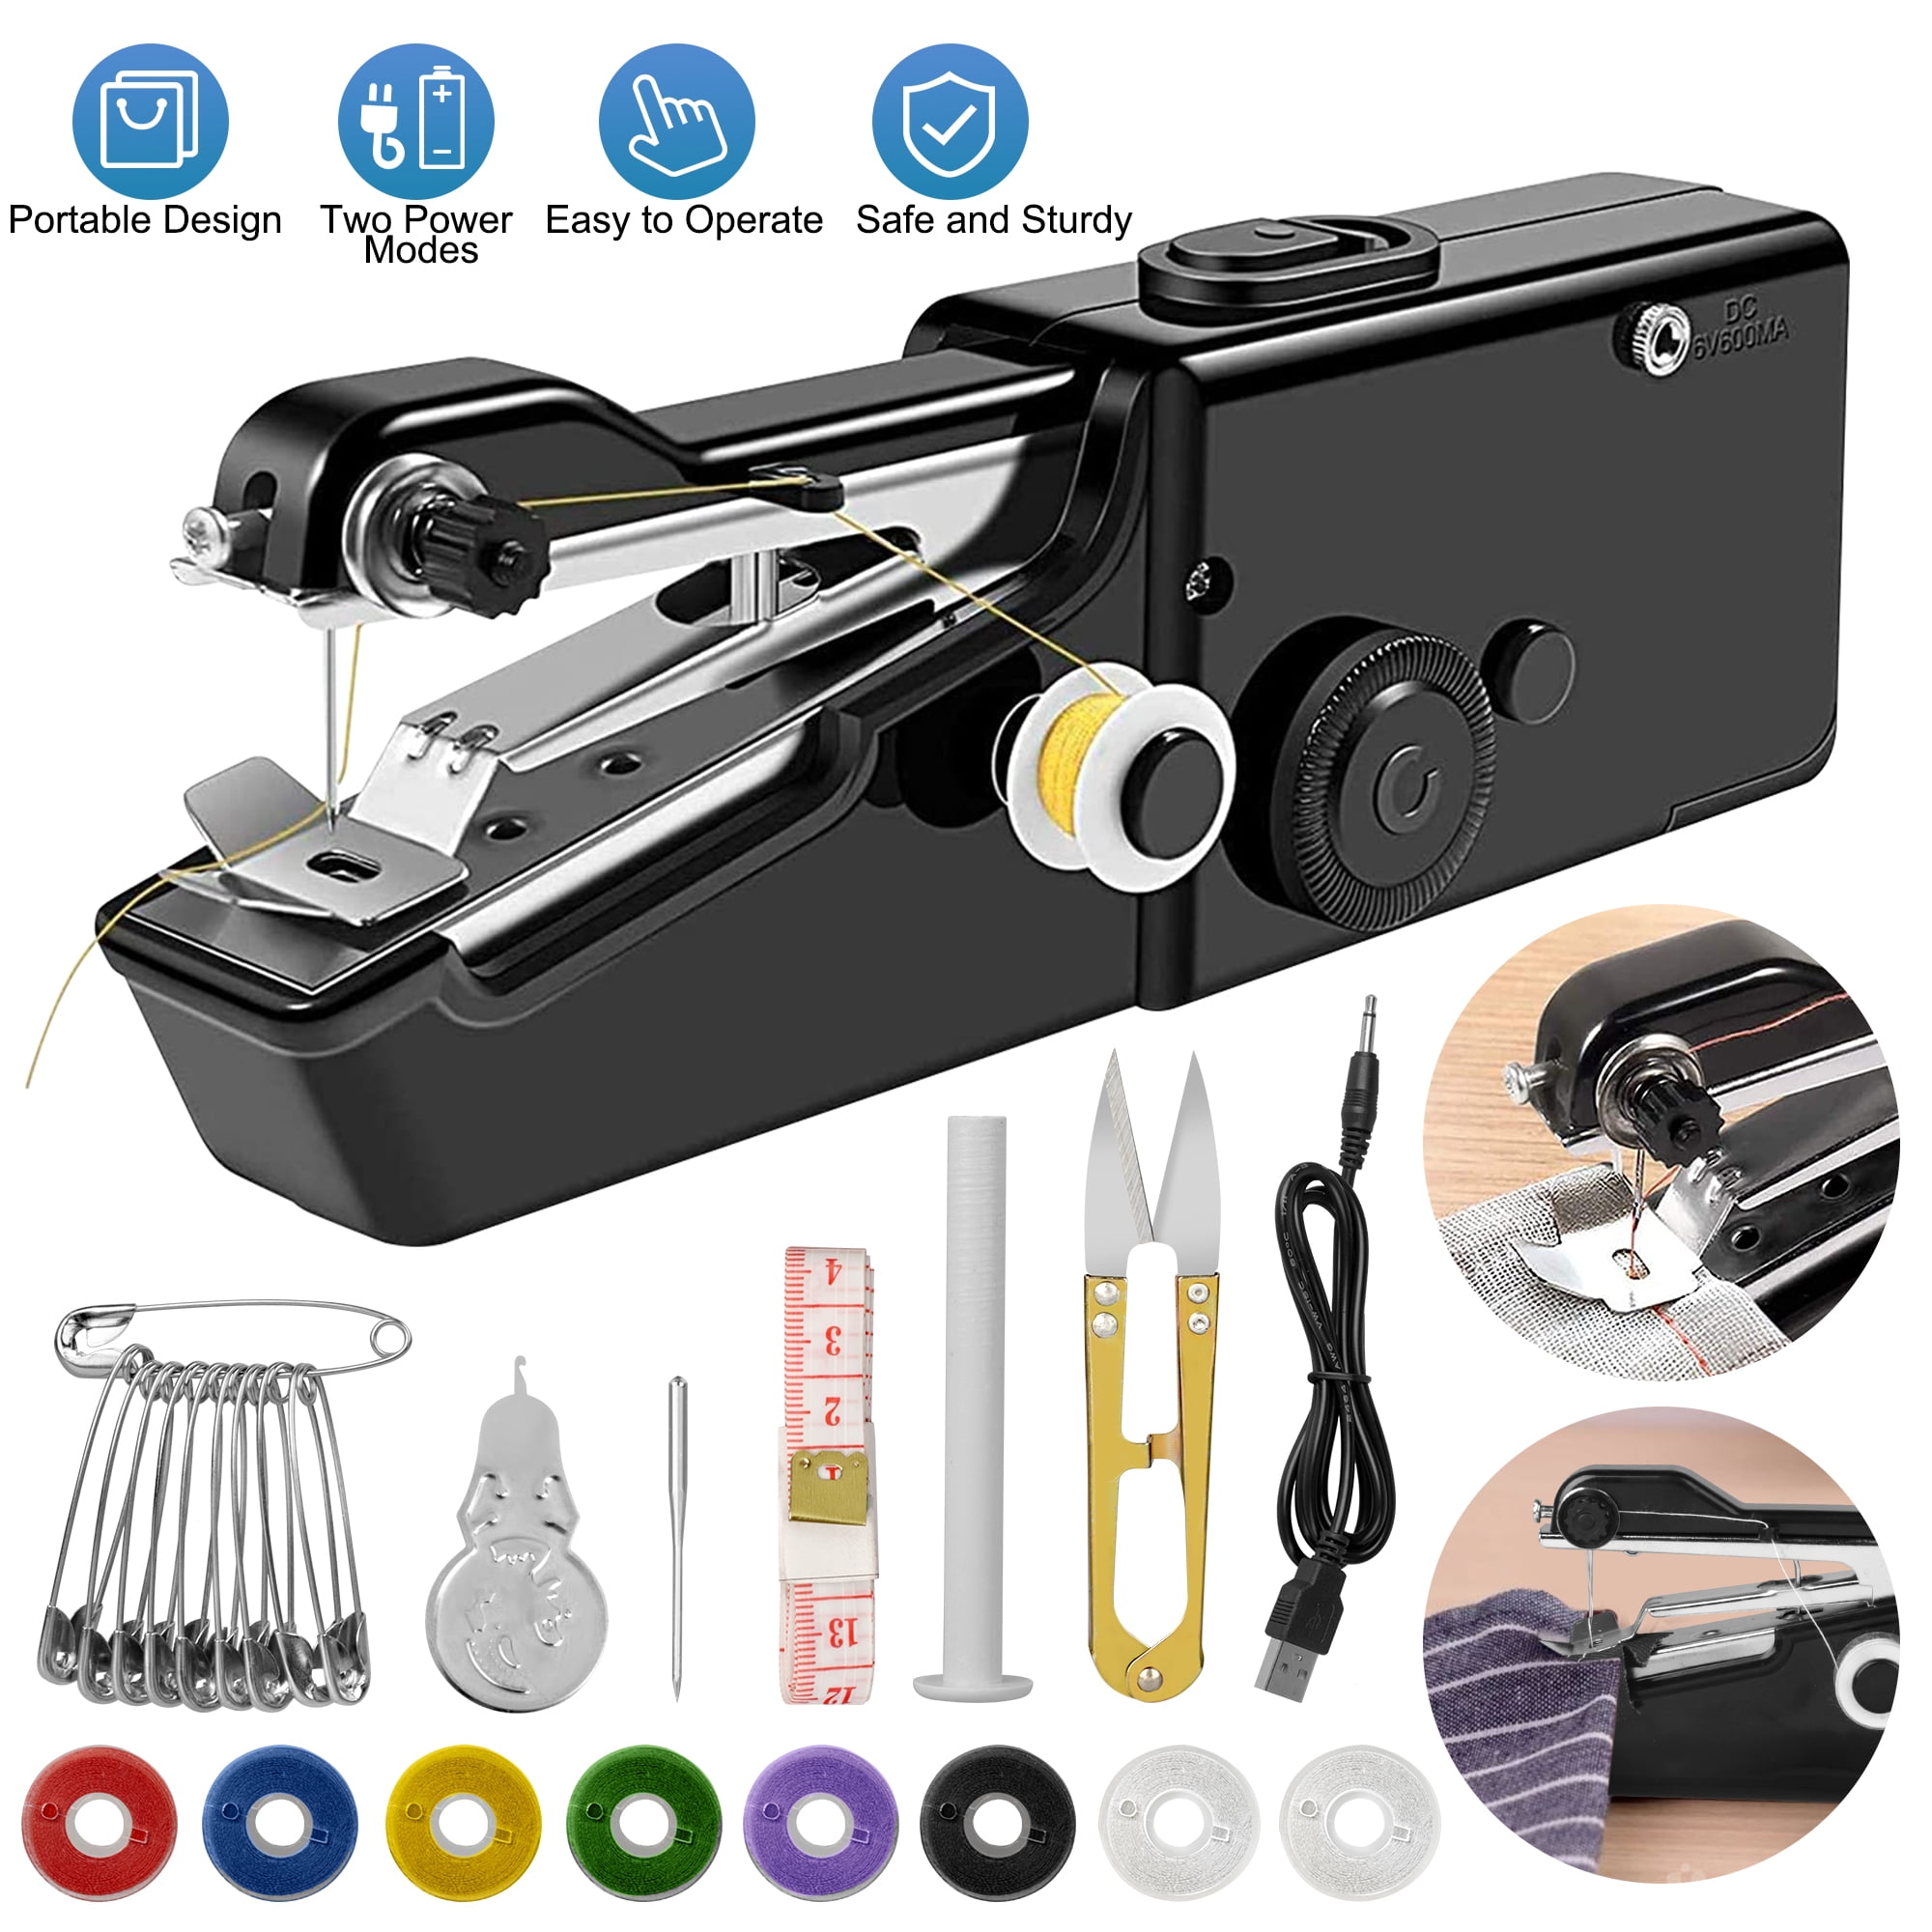 Portable Mini Handheld Sewing Machine Manual Handy Needlework Cordless  Stitch Sew Clothes Household DIY Hat Scarf Sewing Tools - AliExpress